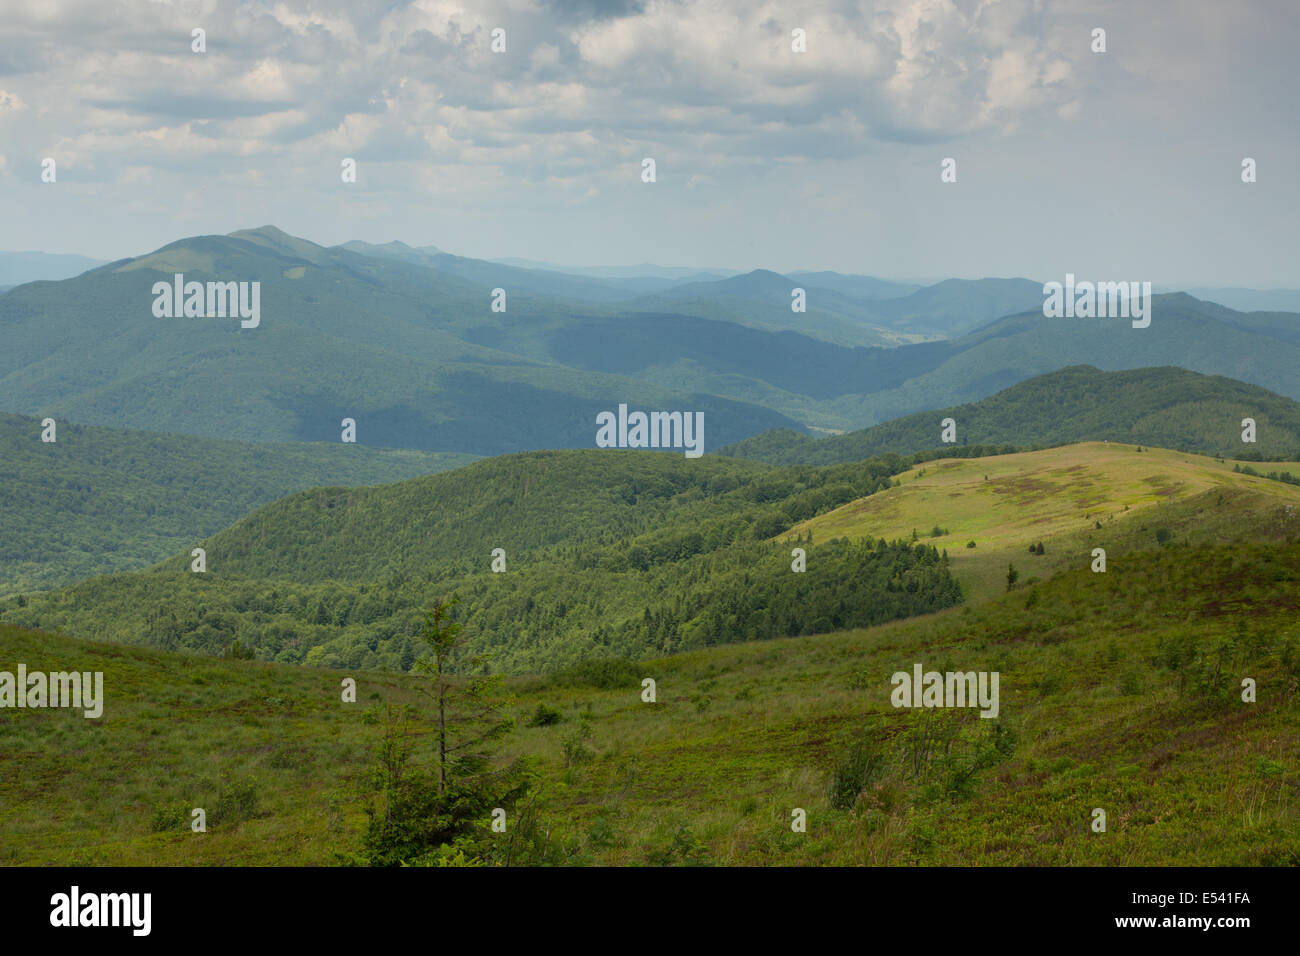 Summertime midday in Bieszczady Mountain range with view from Bukowe Berdo to Polonina Carynska Stock Photo